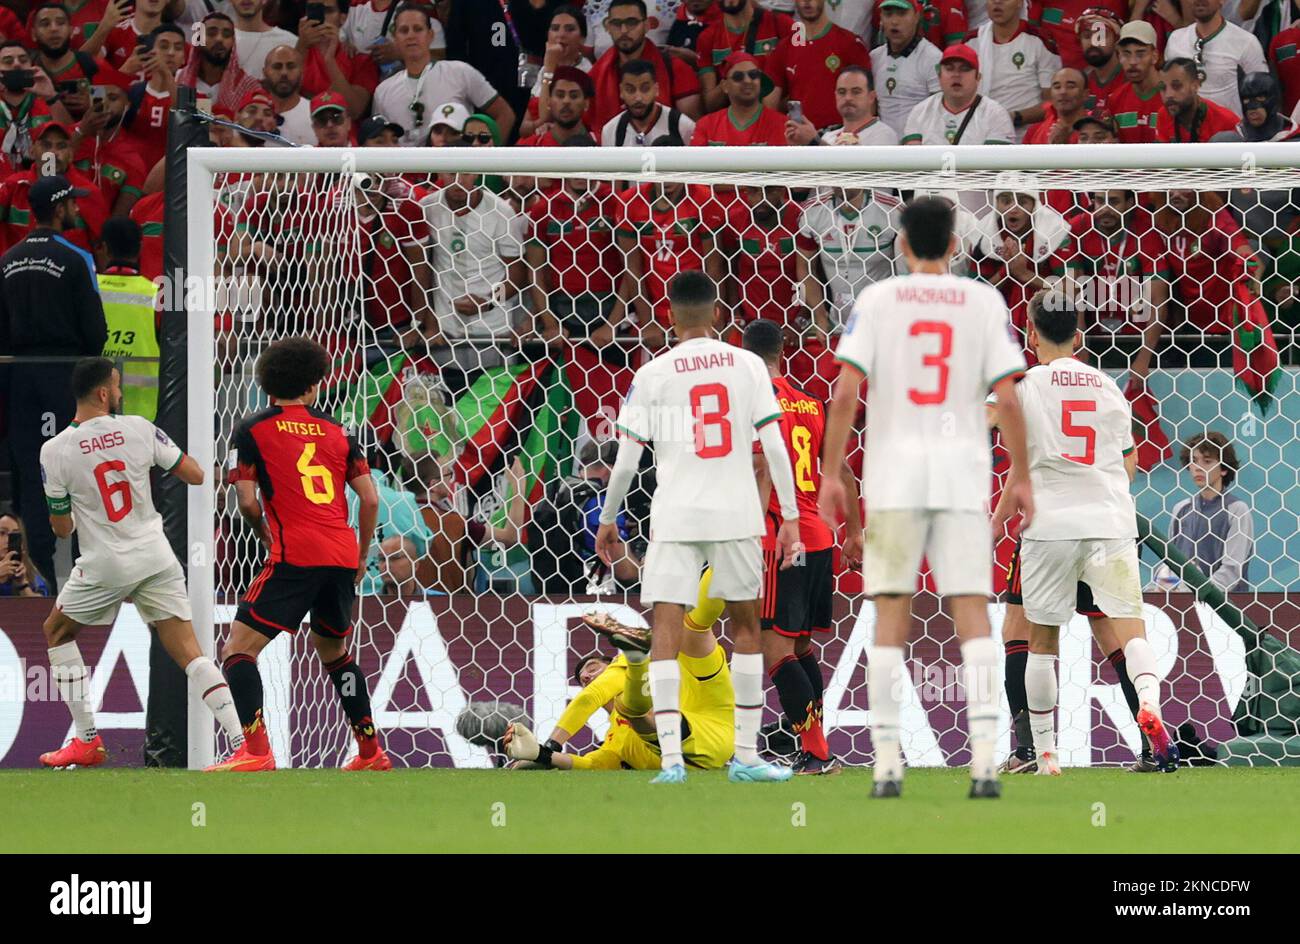 Belgium's goalkeeper Thibaut Courtois pictured in action during a soccer game between Belgium's national team the Red Devils and Morocco, in Group F of the FIFA 2022 World Cup in Al Thumama Stadium, Doha, State of Qatar on Sunday 27 November 2022. BELGA PHOTO VIRGINIE LEFOUR Stock Photo